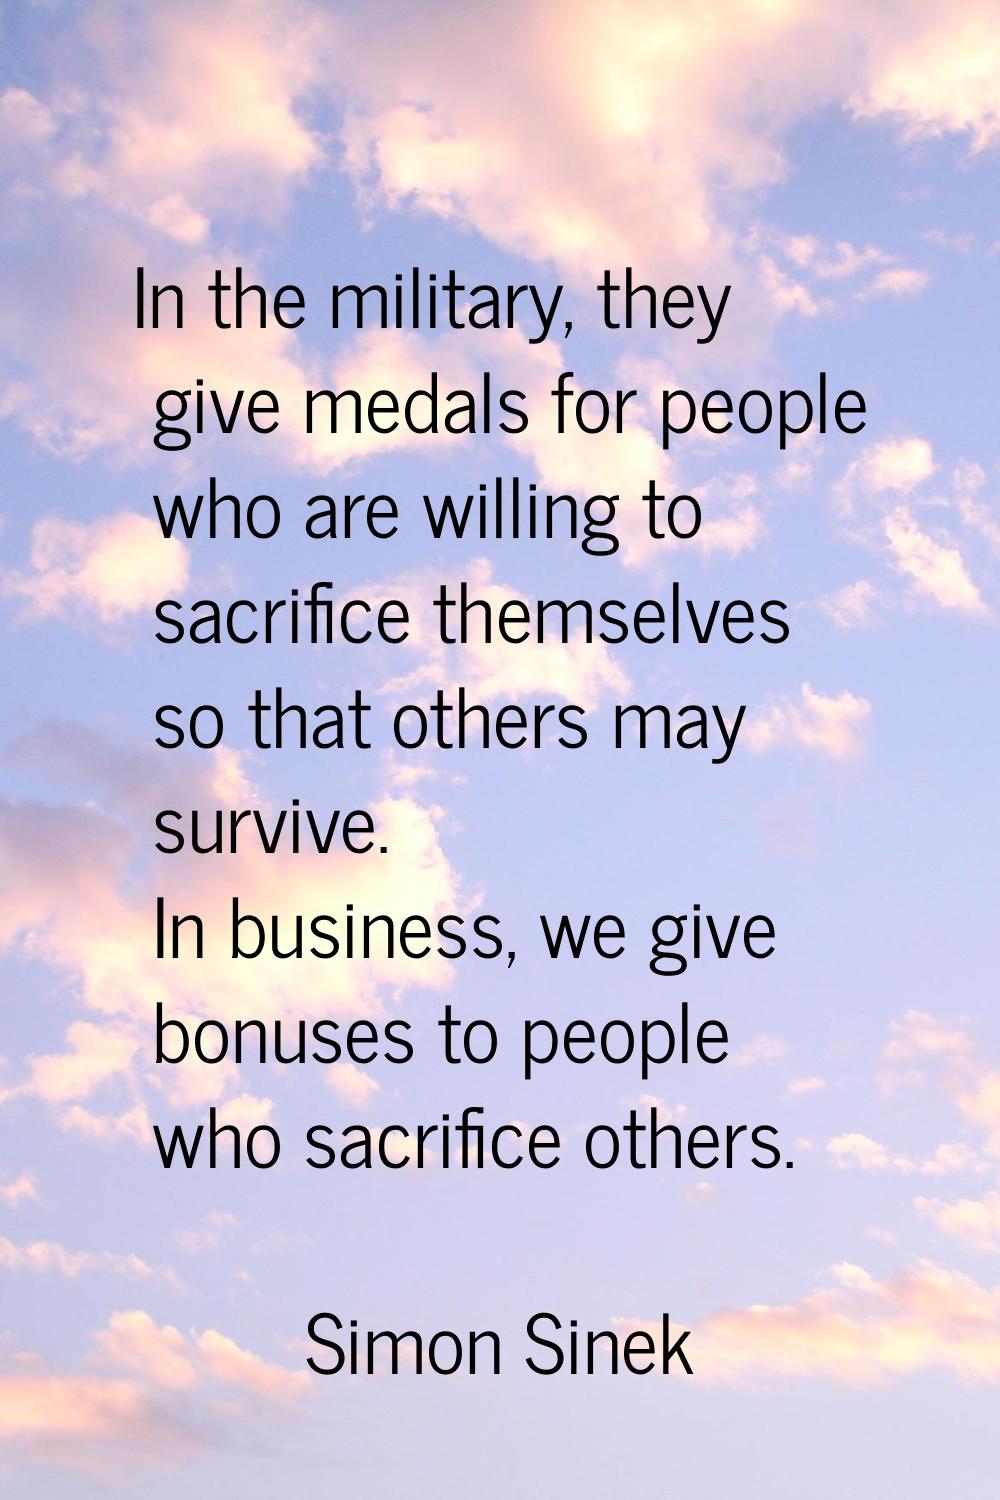 In the military, they give medals for people who are willing to sacrifice themselves so that others